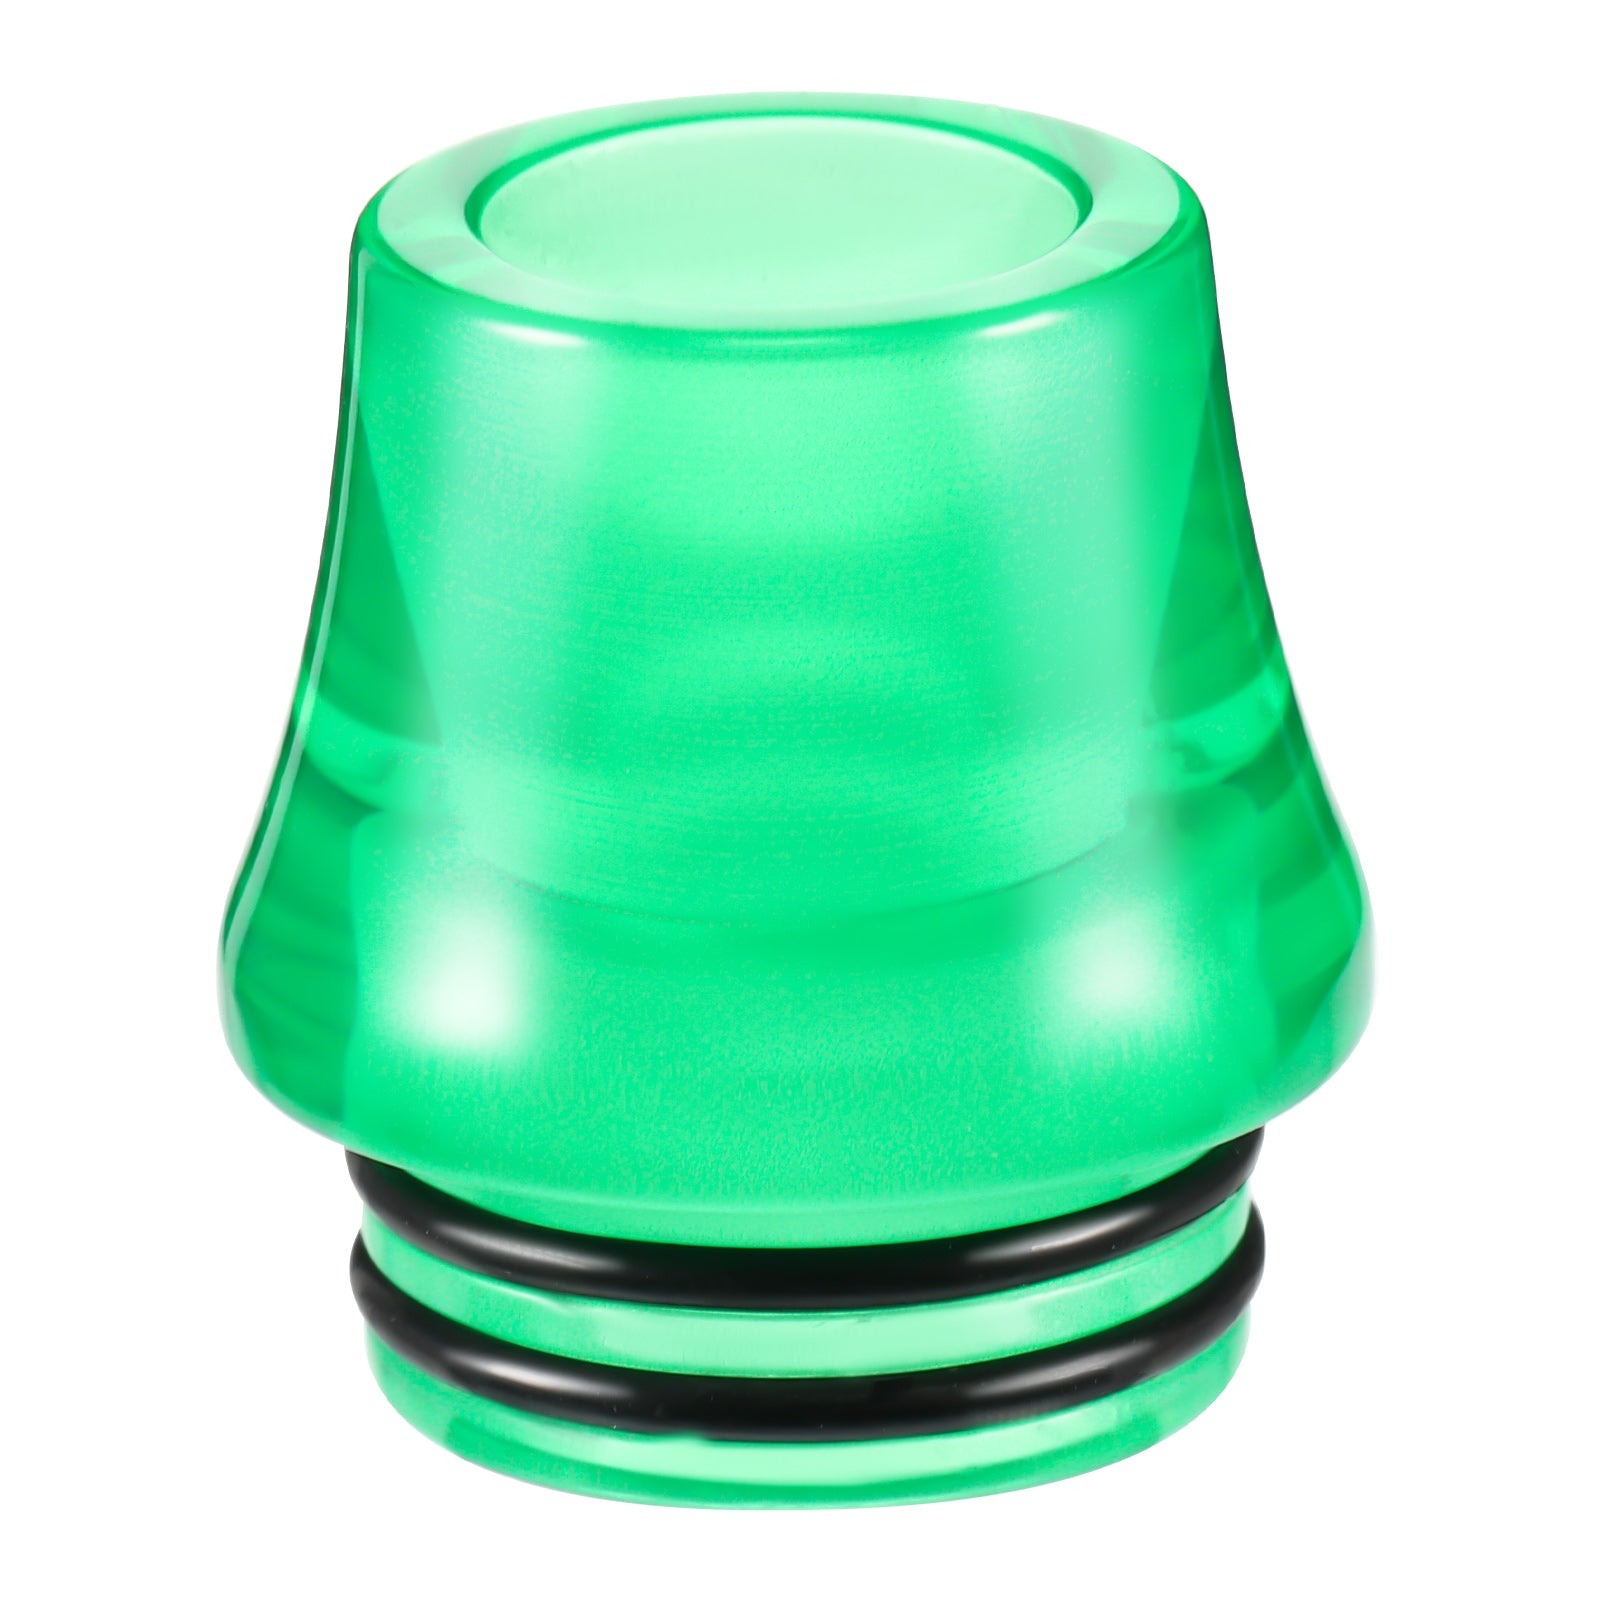 AS349 Resin 810 Drip Tip Mouthpiece 1pc Pack